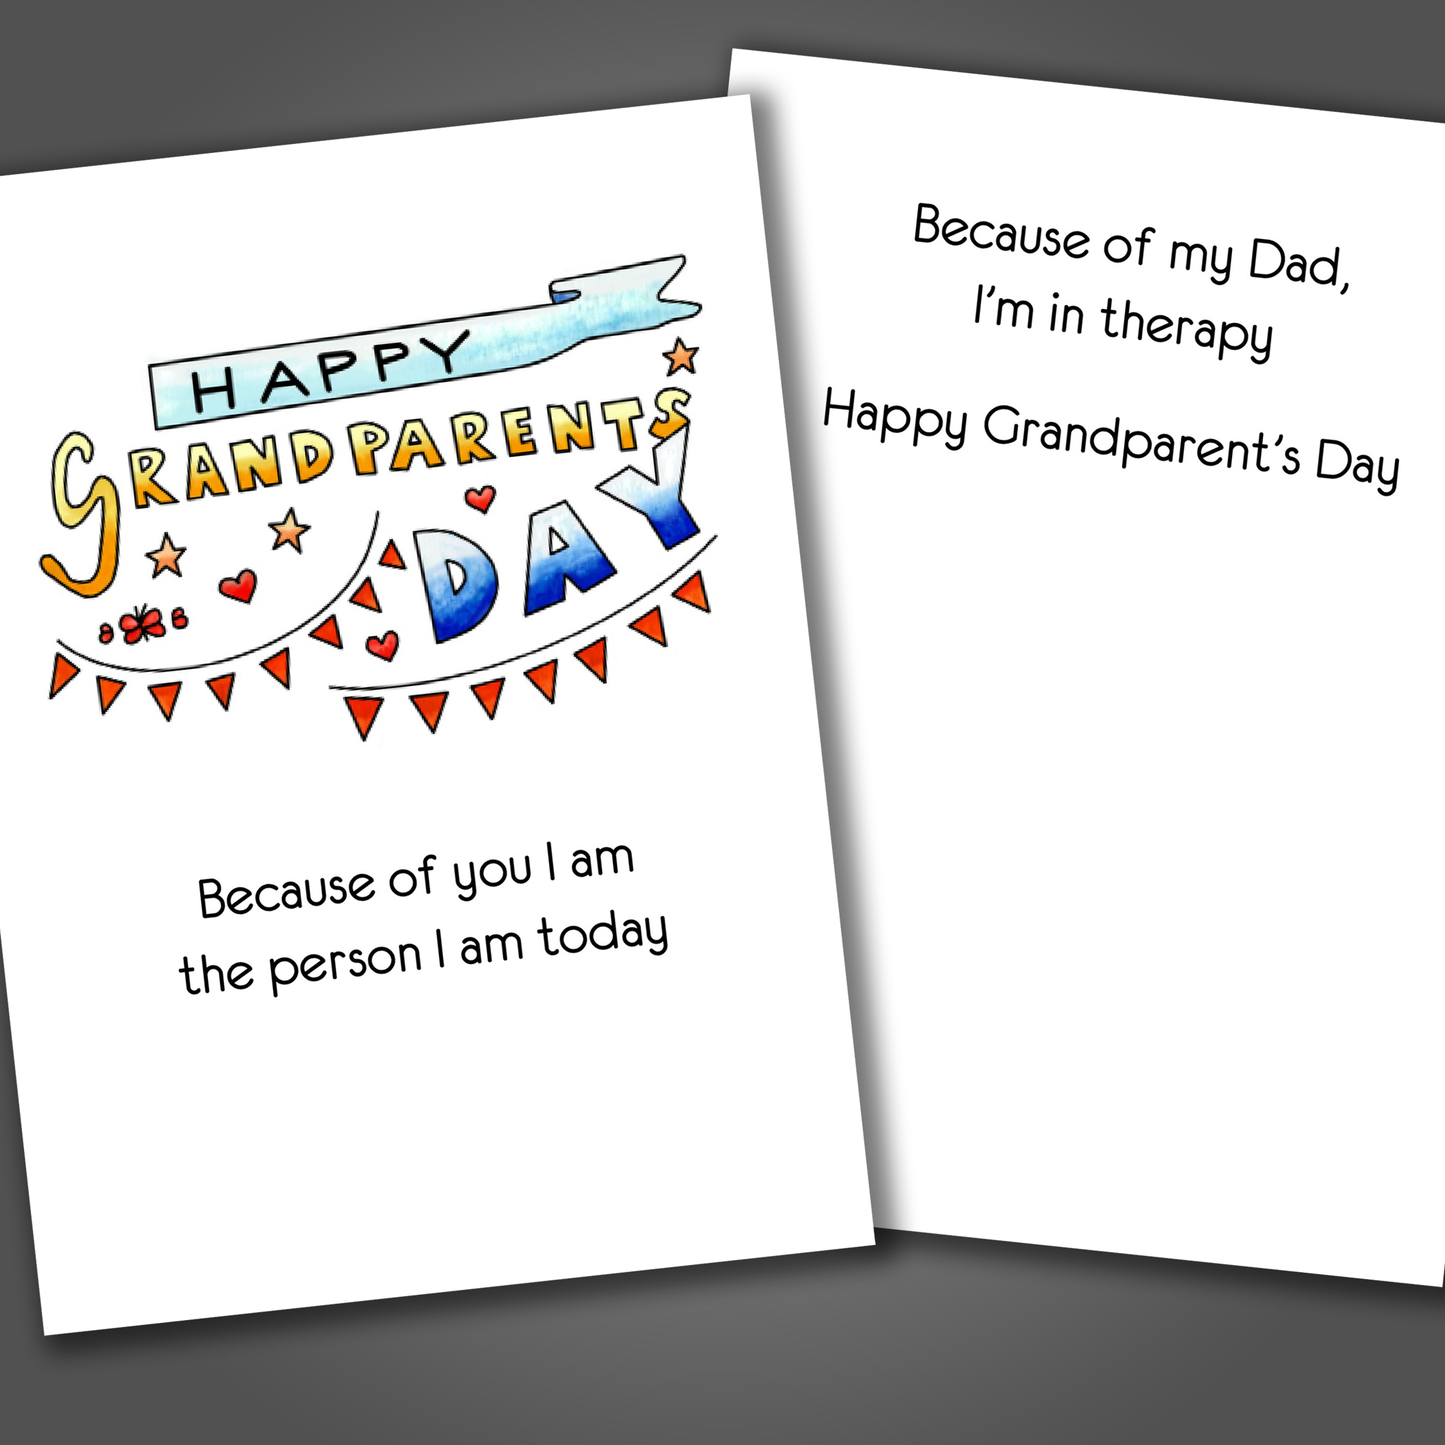 Funny happy Grandparent's day card with streamers drawn on the front of the card. Inside the card is a funny joke that thanks the grandparents.